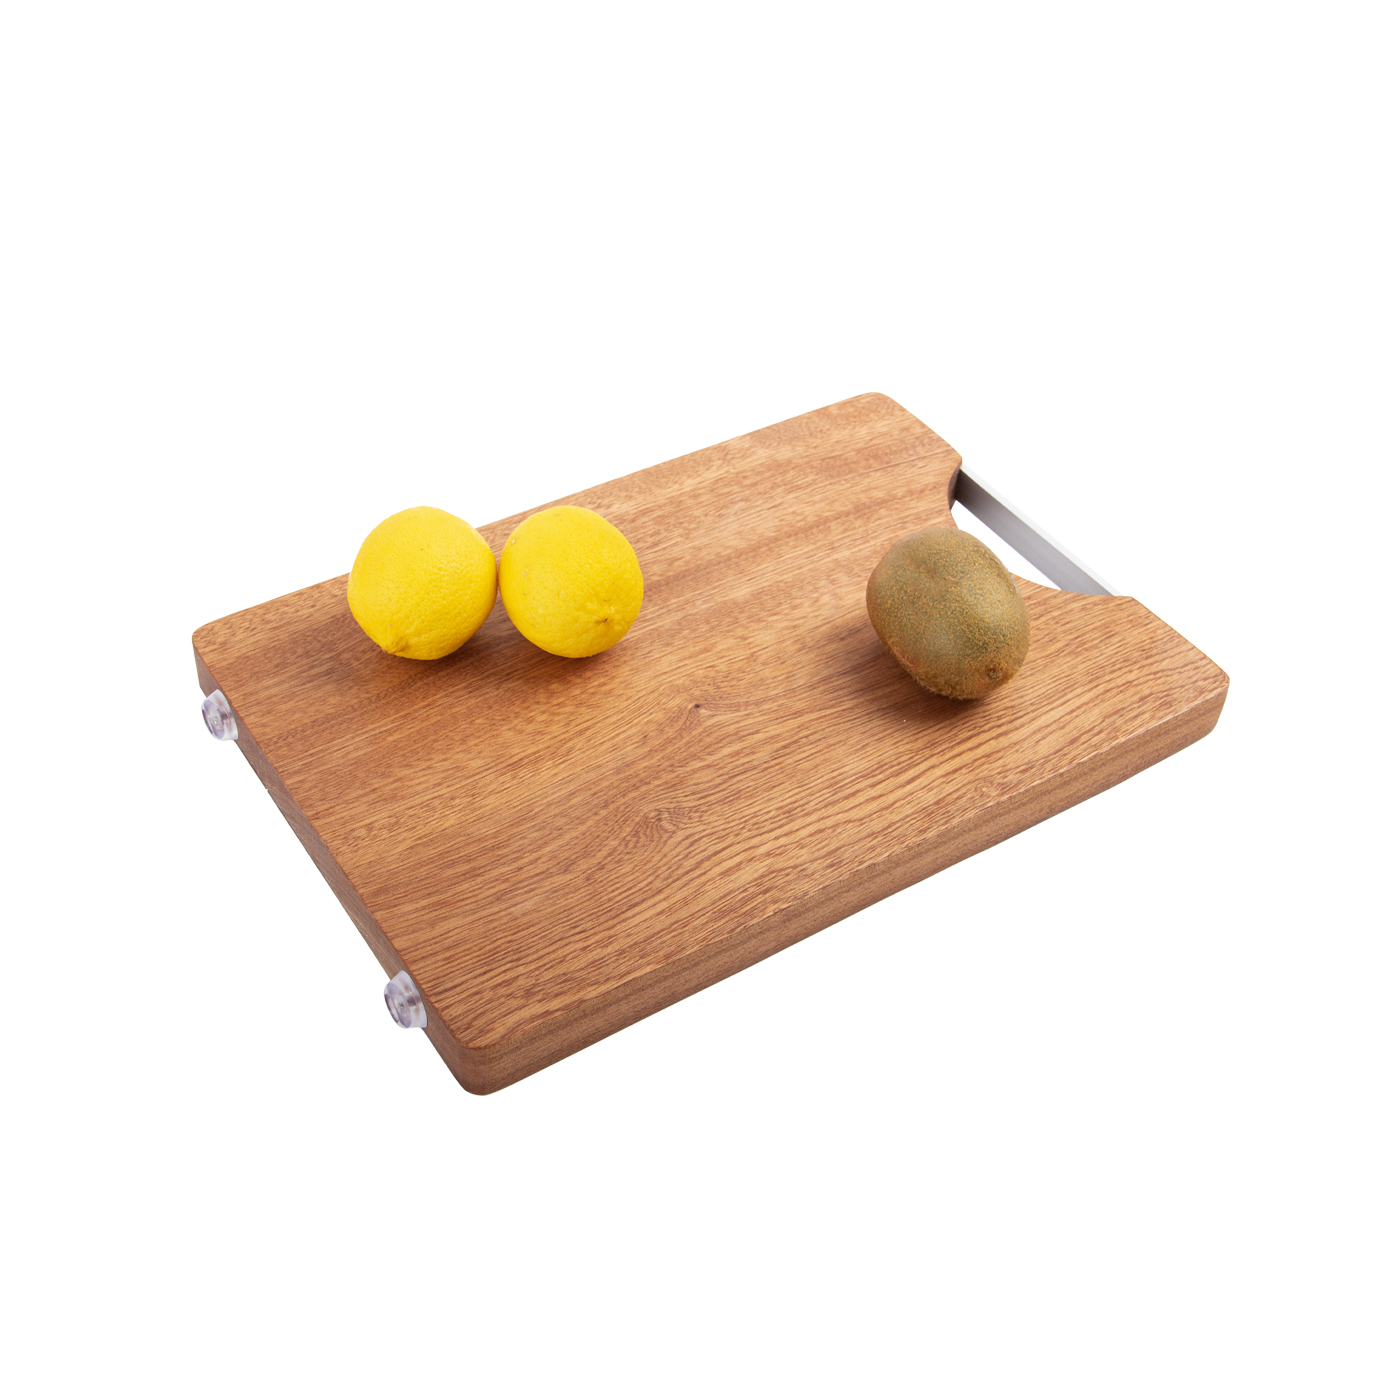 Wooden Cutting Board With Stainless Steel Handle1